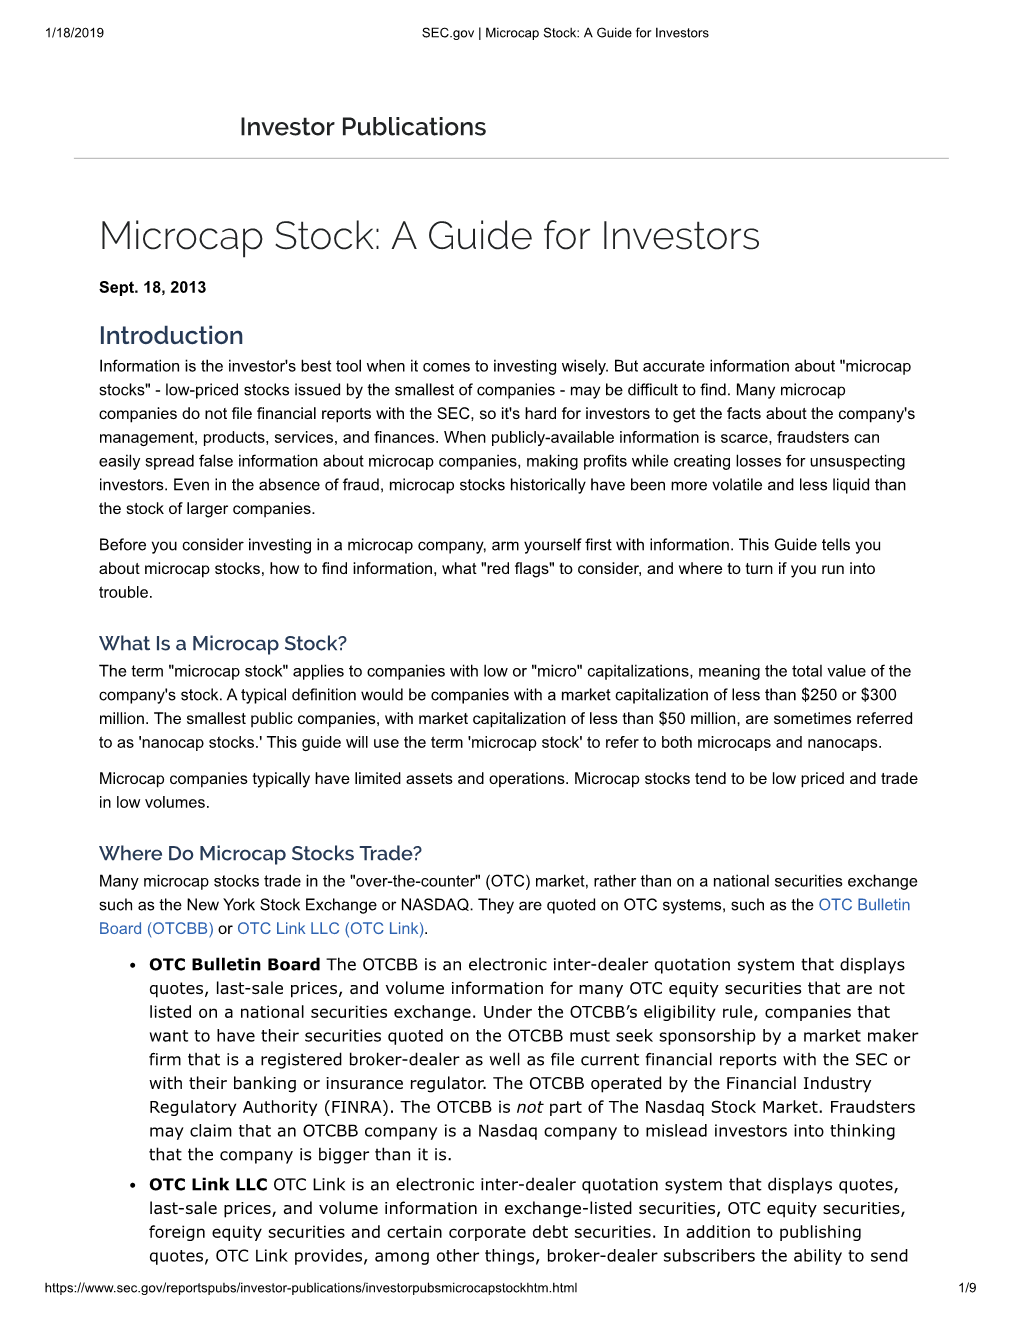 Microcap Stock: a Guide for Investors